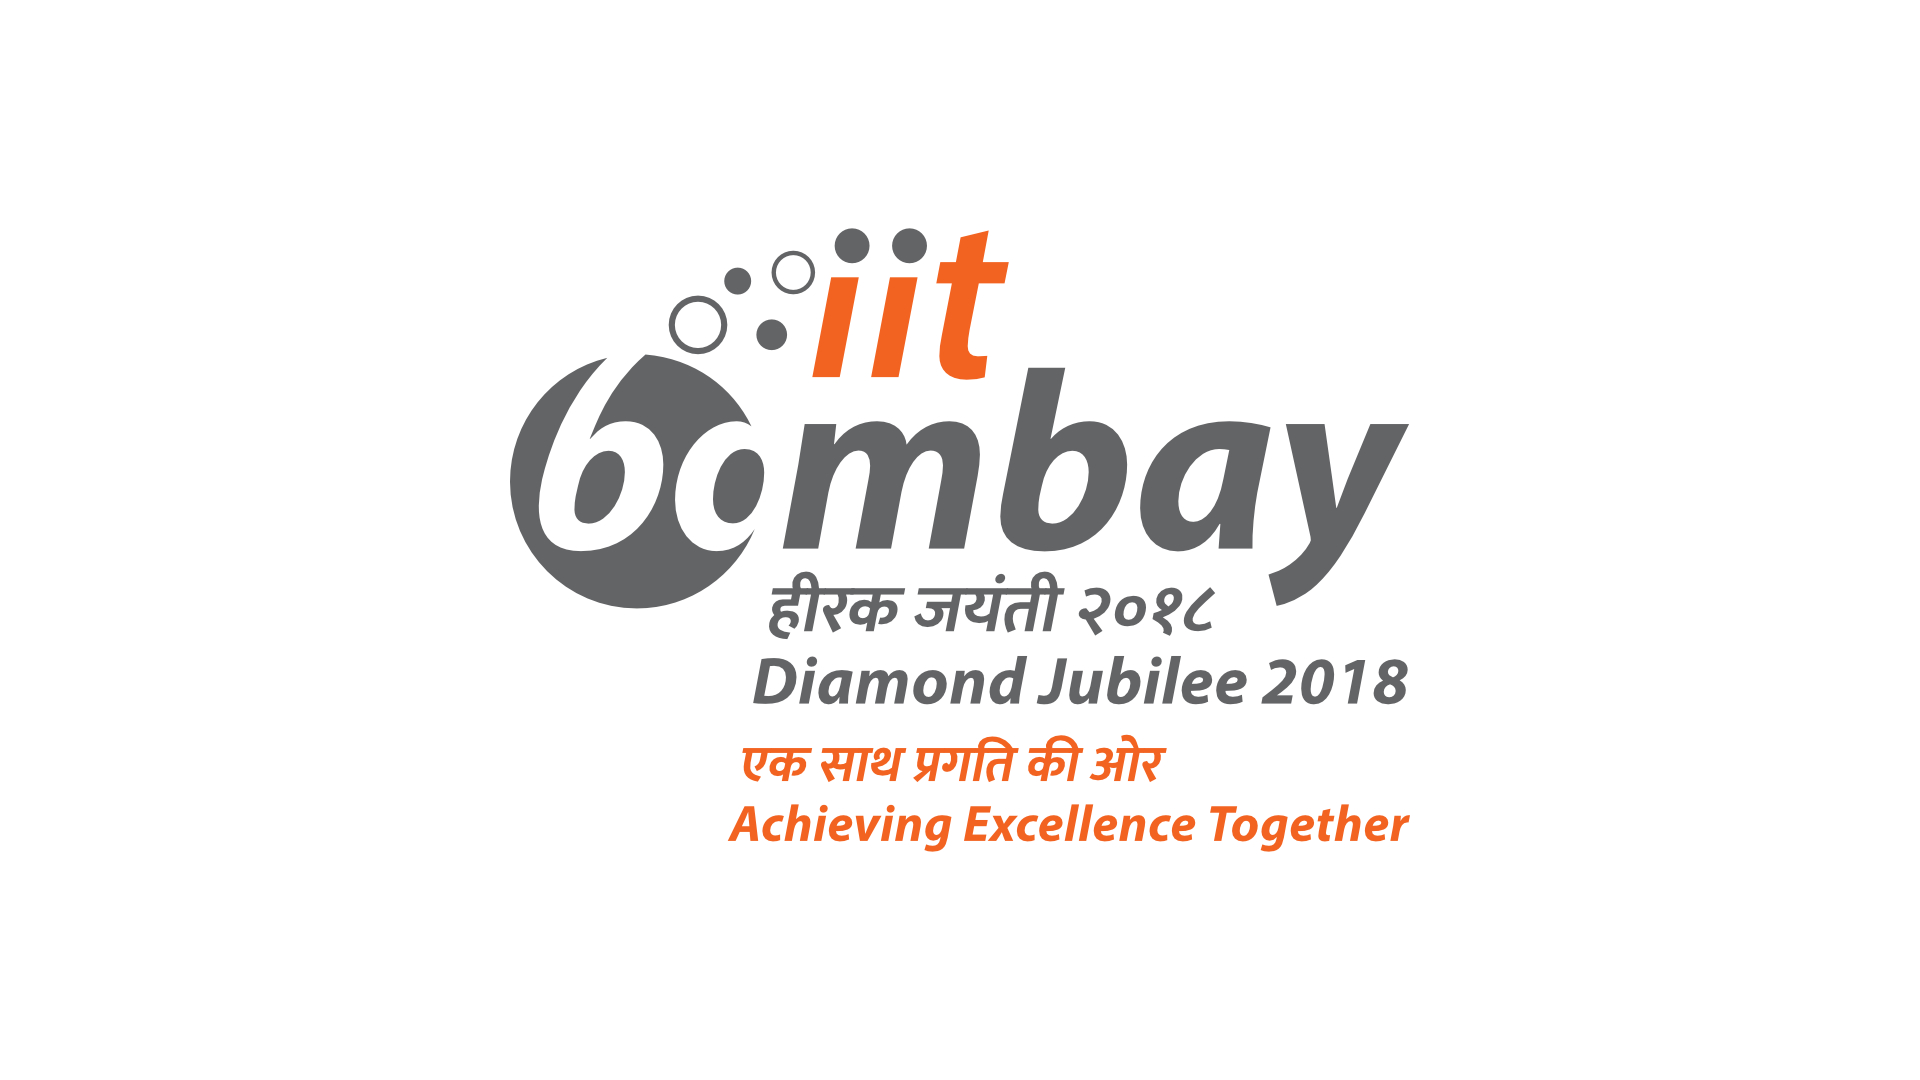 To represent the epitome of knowledge and to exude a sense of sophistication, a very subtle and effective Perceptual shift ambigram is used for the proposal of Diamond Jubilee Celebrations logo. The characters in the circle indicates â€™60â€™ while the consolidated word interprets â€˜bombayâ€™. Though the second letter â€˜oâ€™ is incomplete, closure occurs and viewers perception completes the shape, making it memorable.